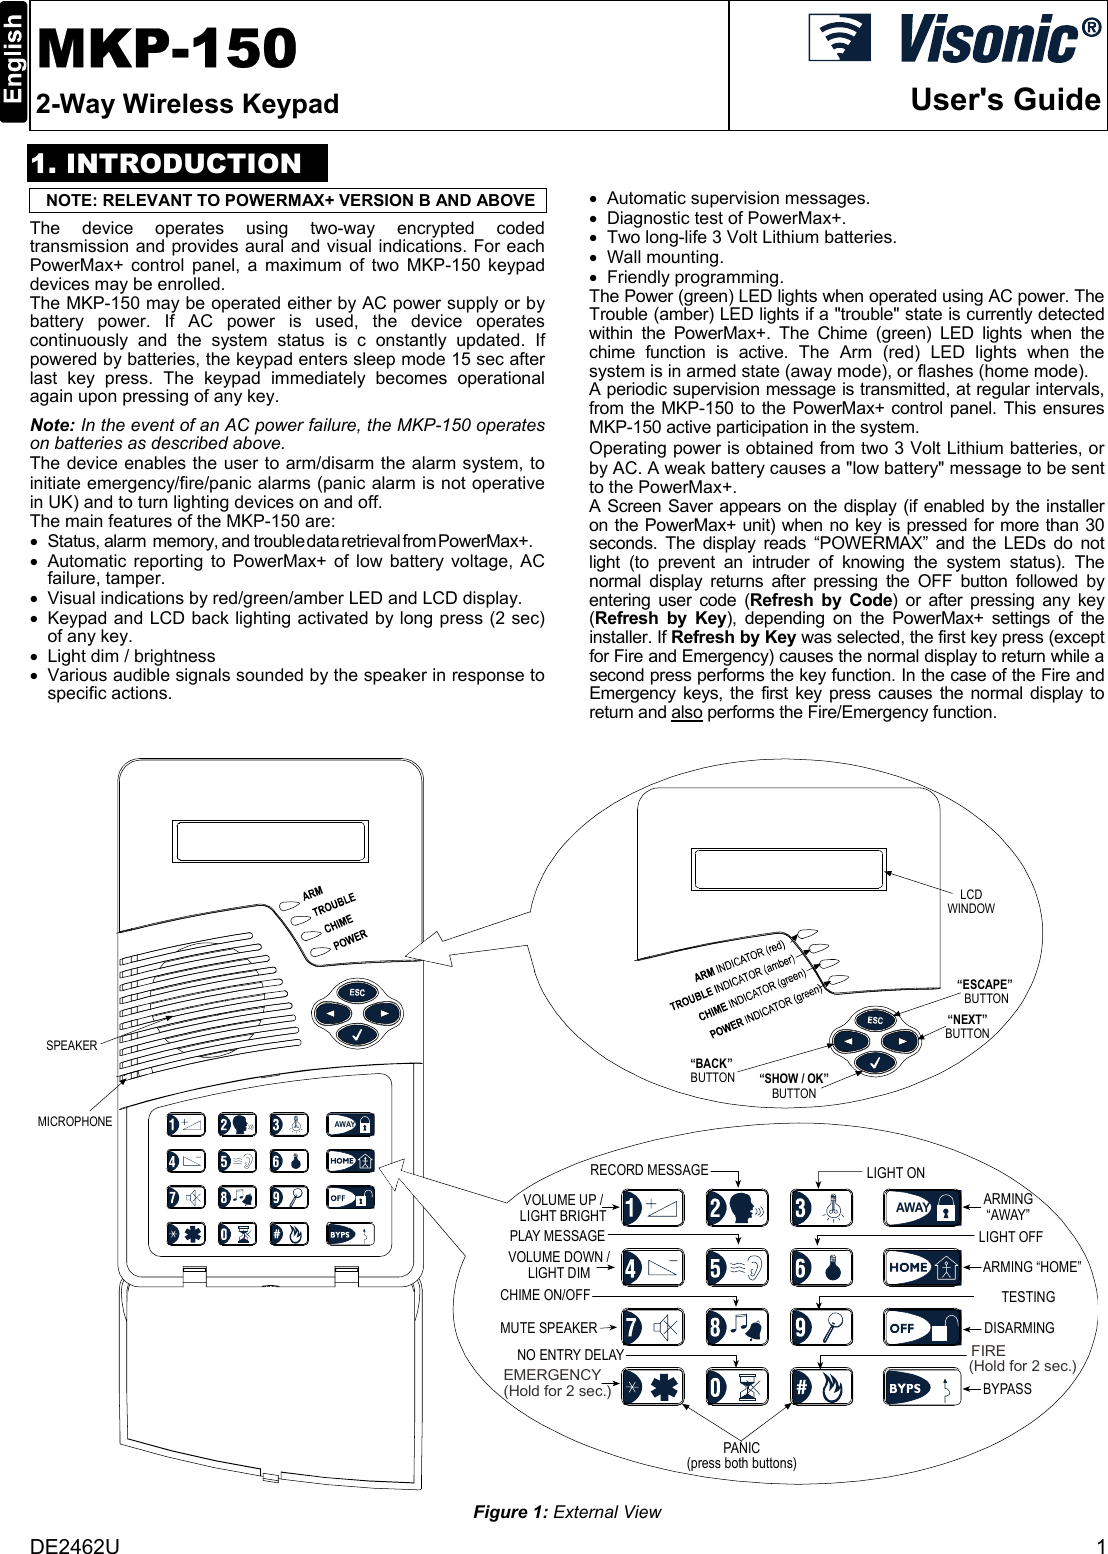 DE2462U  1  MKP-150 2-Way Wireless Keypad  User&apos;s Guide1. INTRODUCTIONNOTE: RELEVANT TO POWERMAX+ VERSION B AND ABOVE The device operates using two-way encrypted coded transmission and provides aural and visual indications. For each PowerMax+ control panel, a maximum of two MKP-150 keypad devices may be enrolled. The MKP-150 may be operated either by AC power supply or by battery power. If AC power is used, the device operates continuously and the system status is c onstantly updated. If powered by batteries, the keypad enters sleep mode 15 sec after last key press. The keypad immediately becomes operational again upon pressing of any key. Note: In the event of an AC power failure, the MKP-150 operates on batteries as described above. The device enables the user to arm/disarm the alarm system, to initiate emergency/fire/panic alarms (panic alarm is not operative in UK) and to turn lighting devices on and off. The main features of the MKP-150 are: • Status, alarm  memory, and trouble data retrieval from PowerMax+. •  Automatic reporting to PowerMax+ of low battery voltage, AC failure, tamper. •  Visual indications by red/green/amber LED and LCD display. •  Keypad and LCD back lighting activated by long press (2 sec) of any key. •  Light dim / brightness •  Various audible signals sounded by the speaker in response to specific actions. •  Automatic supervision messages. •  Diagnostic test of PowerMax+. •  Two long-life 3 Volt Lithium batteries. • Wall mounting. • Friendly programming. The Power (green) LED lights when operated using AC power. The Trouble (amber) LED lights if a &quot;trouble&quot; state is currently detected within the PowerMax+. The Chime (green) LED lights when the chime function is active. The Arm (red) LED lights when the system is in armed state (away mode), or flashes (home mode). A periodic supervision message is transmitted, at regular intervals, from the MKP-150 to the PowerMax+ control panel. This ensures MKP-150 active participation in the system. Operating power is obtained from two 3 Volt Lithium batteries, or by AC. A weak battery causes a &quot;low battery&quot; message to be sent to the PowerMax+. A Screen Saver appears on the display (if enabled by the installer on the PowerMax+ unit) when no key is pressed for more than 30 seconds. The display reads “POWERMAX” and the LEDs do not light (to prevent an intruder of knowing the system status). The normal display returns after pressing the OFF button followed by entering user code (Refresh by Code) or after pressing any key (Refresh by Key), depending on the PowerMax+ settings of the installer. If Refresh by Key was selected, the first key press (except for Fire and Emergency) causes the normal display to return while a second press performs the key function. In the case of the Fire and Emergency keys, the first key press causes the normal display to return and also performs the Fire/Emergency function.  AWAYMICROPHONEPLAY MESSAGEVOLUME UP /LIGHT BRIGHTVOLUME DOWN /LIGHT DIMCHIME ON/OFFMUTE SPEAKERNO ENTRY DELAYRECORD MESSAGELIGHT OFFTESTINGARMING“AWAY”ARMING “HOME”DISARMINGBYPASSLIGHT ONEMERGENCY(Hold for 2 sec.)(Hold for 2 sec.)FIREPANIC(press both buttons)“SHOW / OK”BUTTON“ESCAPE” BUTTON“NEXT”BUTTONLCDWINDOW“BACK” BUTTONSPEAKERAWAY Figure 1: External View 